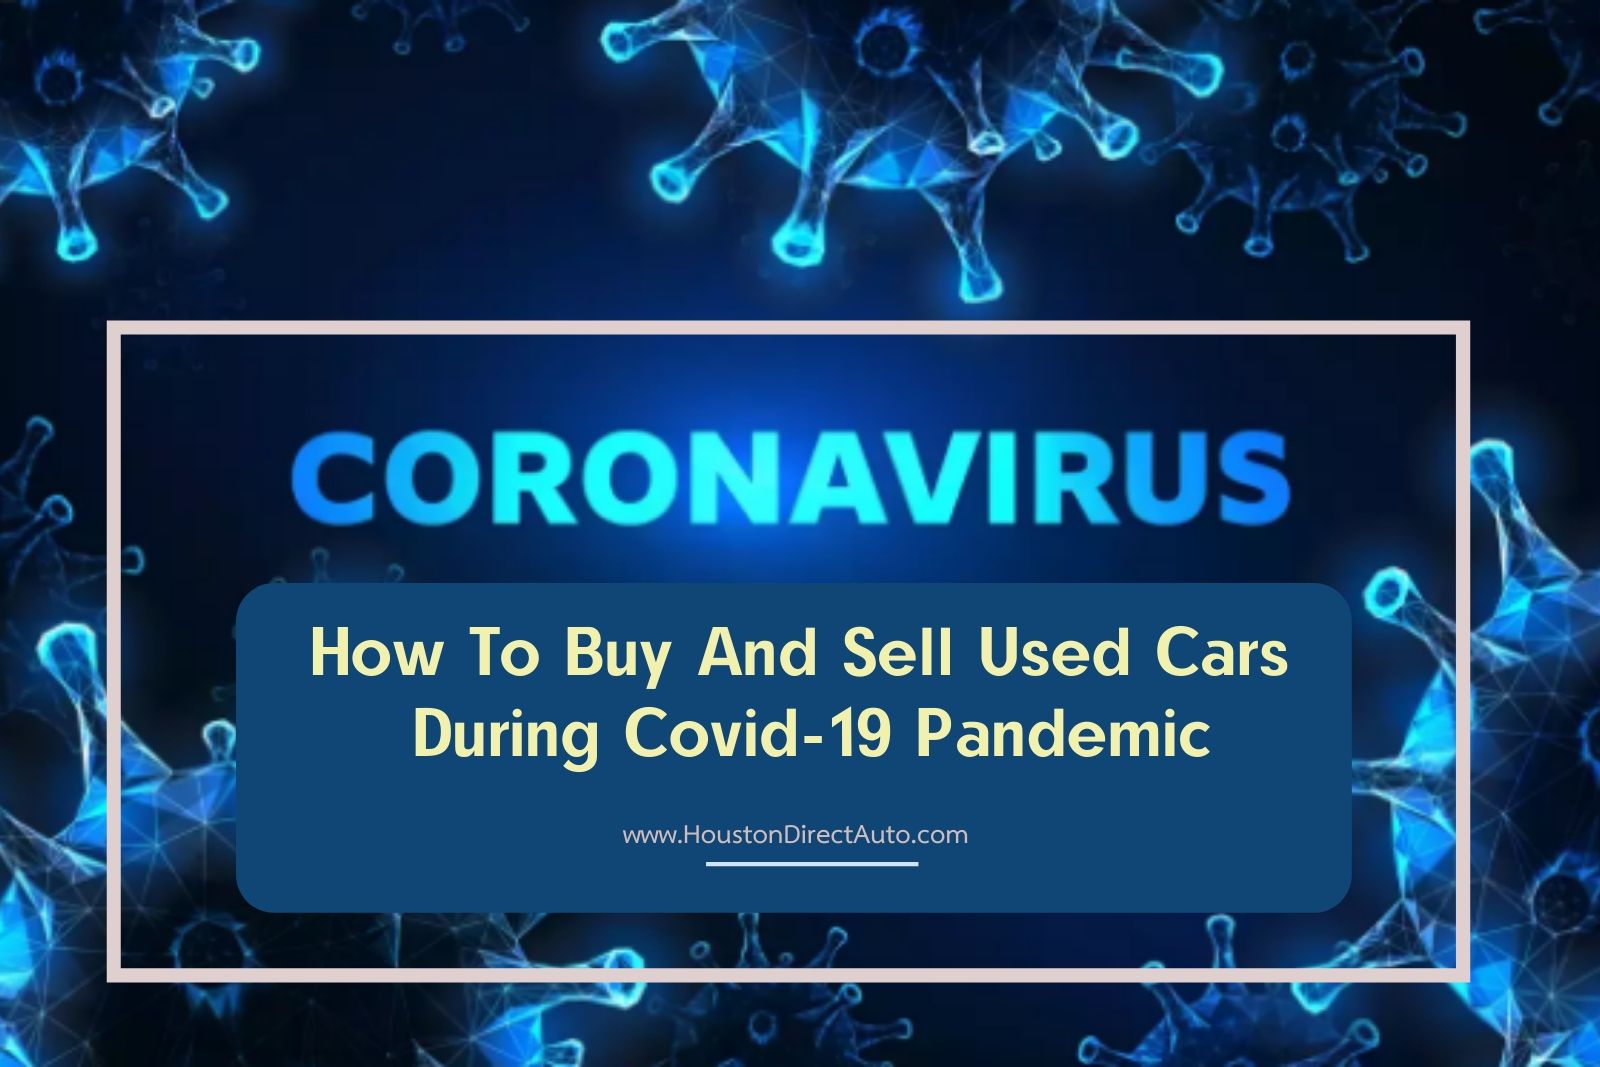 How To Buy And Sell Used Cars During Covid-19 Pandemic